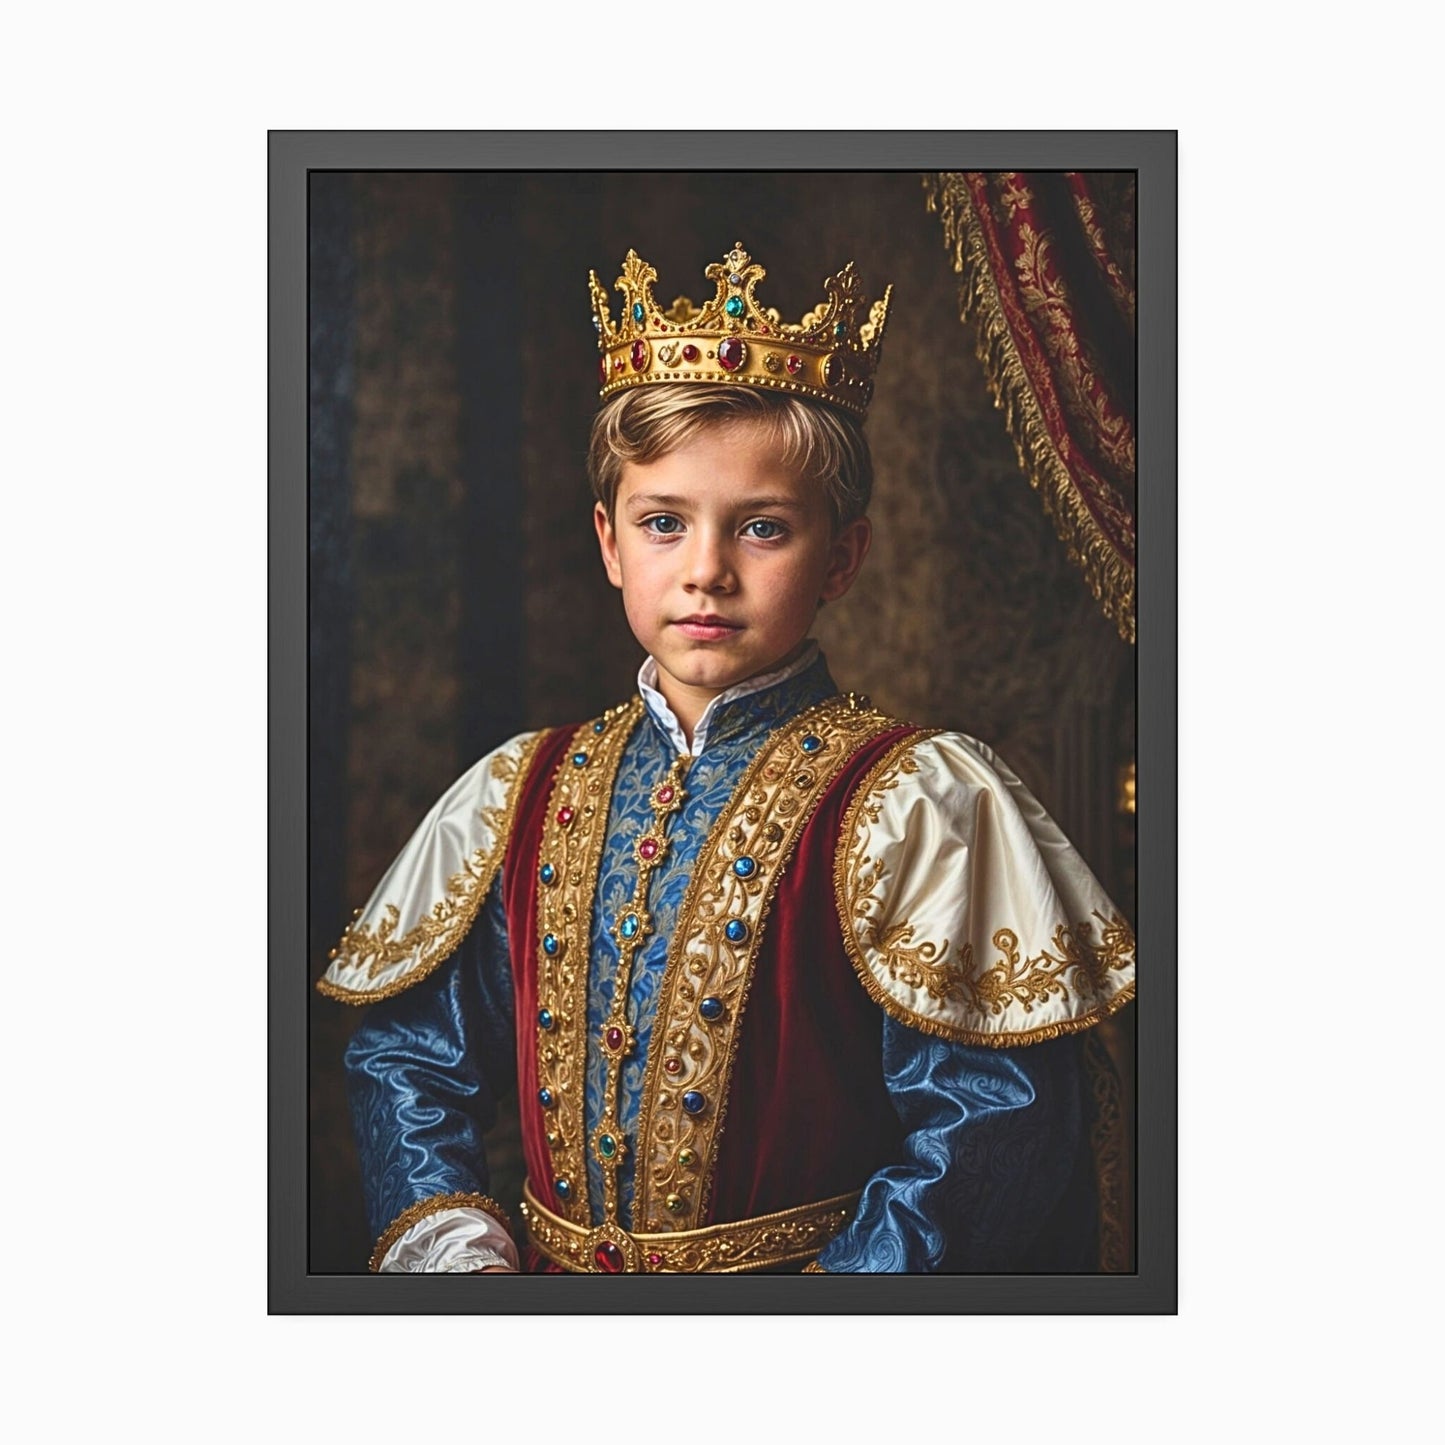 Turn your child's photo into a regal work of art with our Custom Kid Royal Portraits. Perfect for birthdays and special occasions, these personalized portraits of your little King or Queen capture timeless elegance. Create a unique, Renaissance-style masterpiece that will adorn any child's room with royal flair.